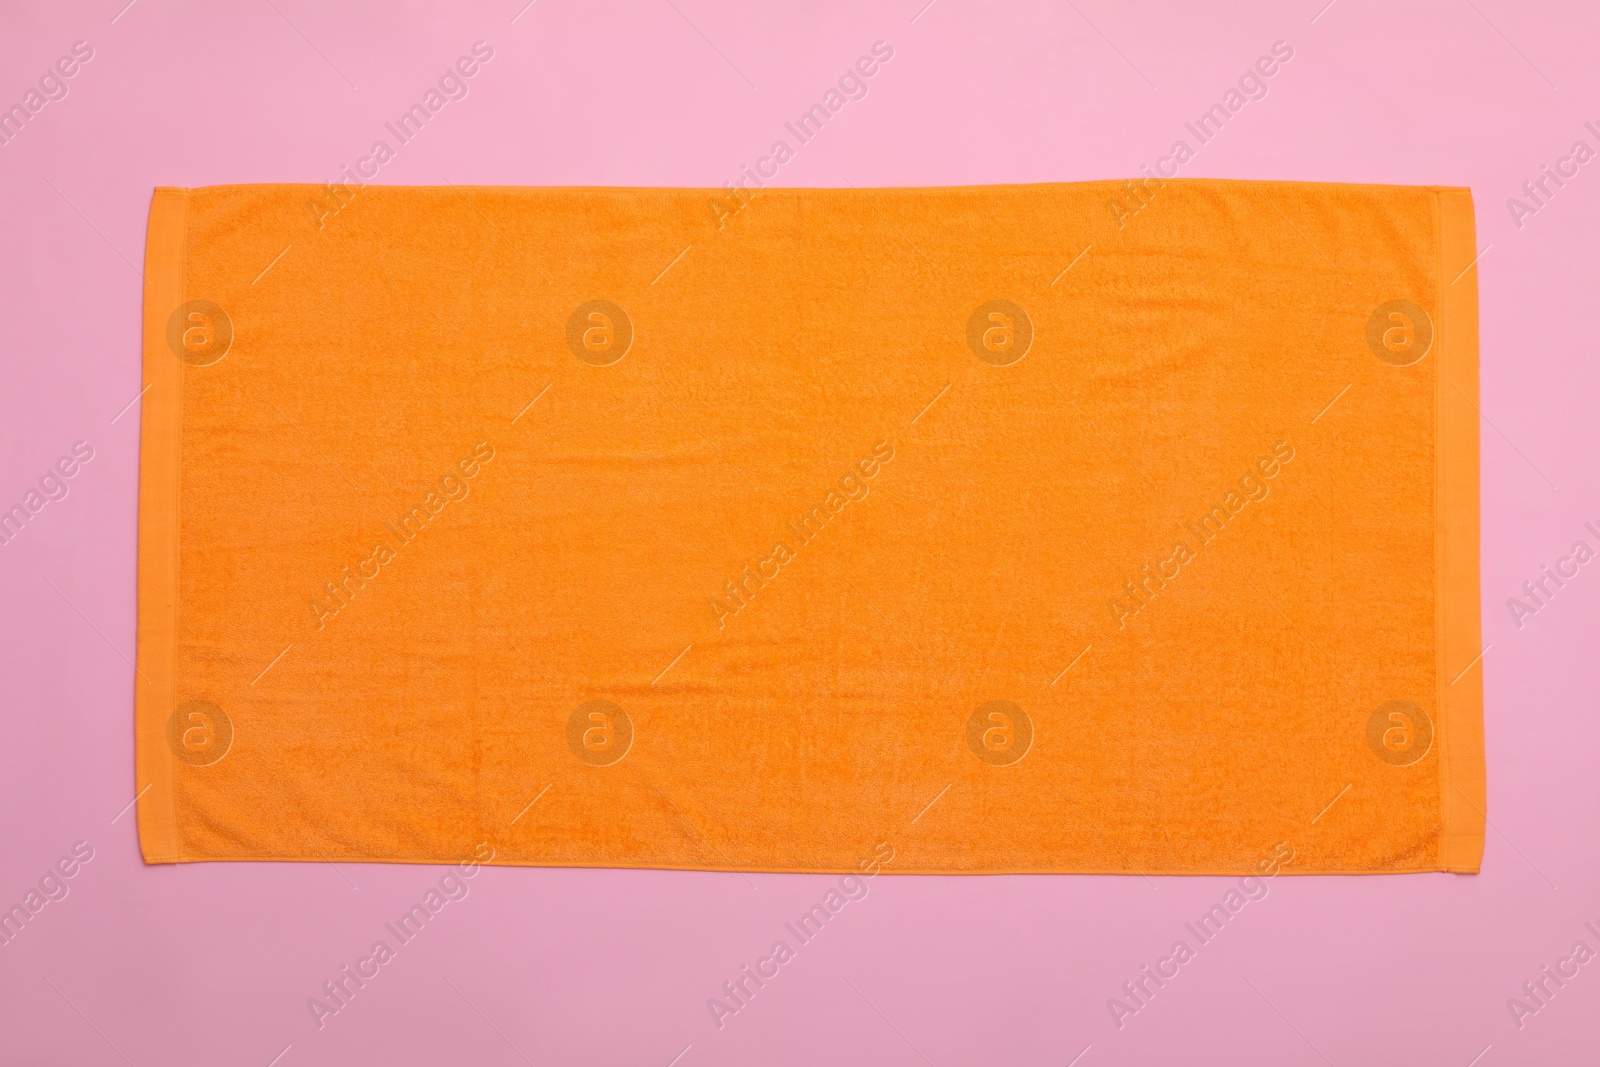 Photo of Orange beach towel on pink background, top view